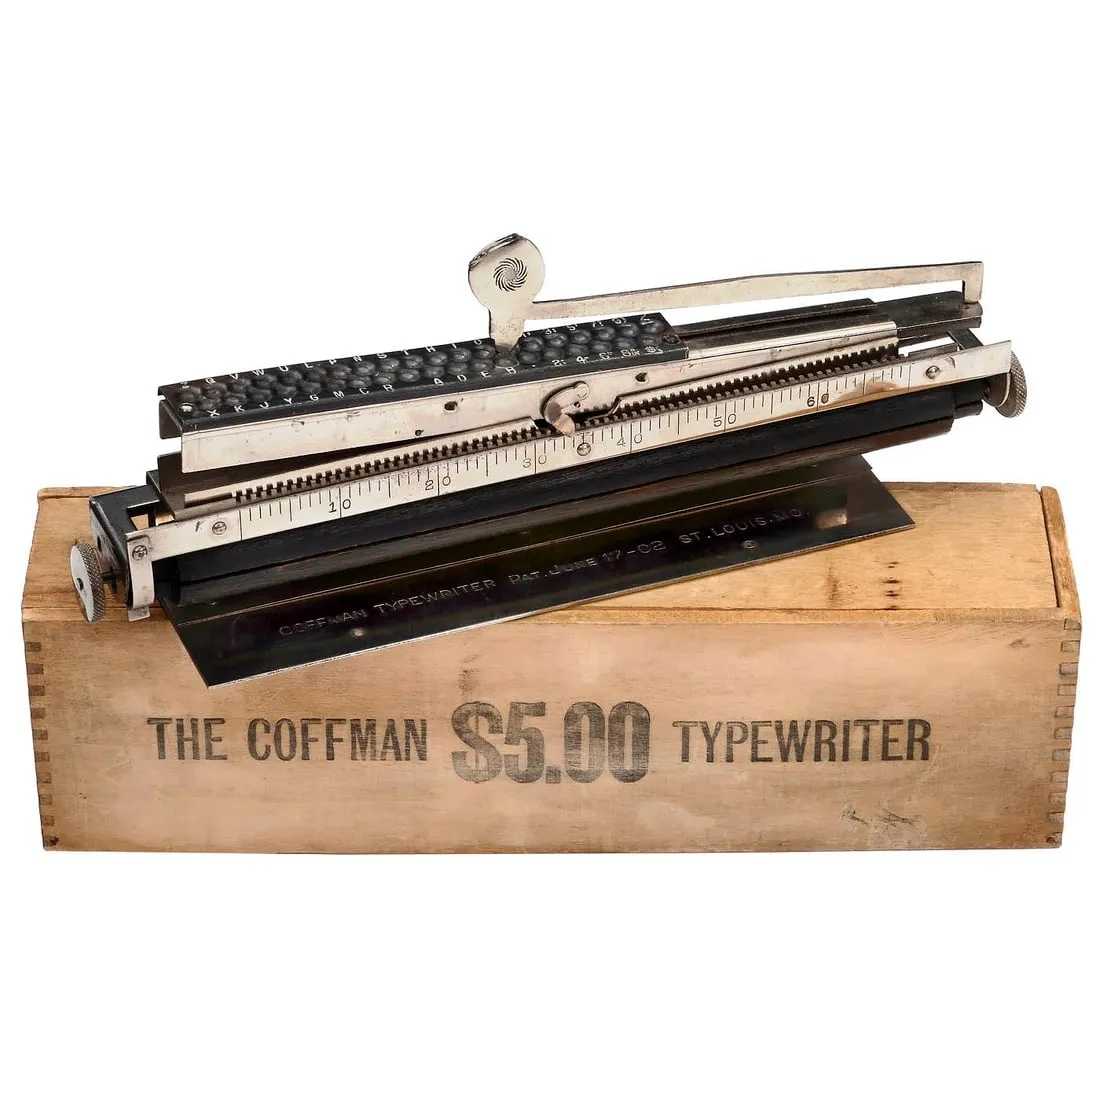 Coffman Pocket Typewriter, which sold for €7,000 ($7,580, or $9,380 with buyer’s premium) at Breker.